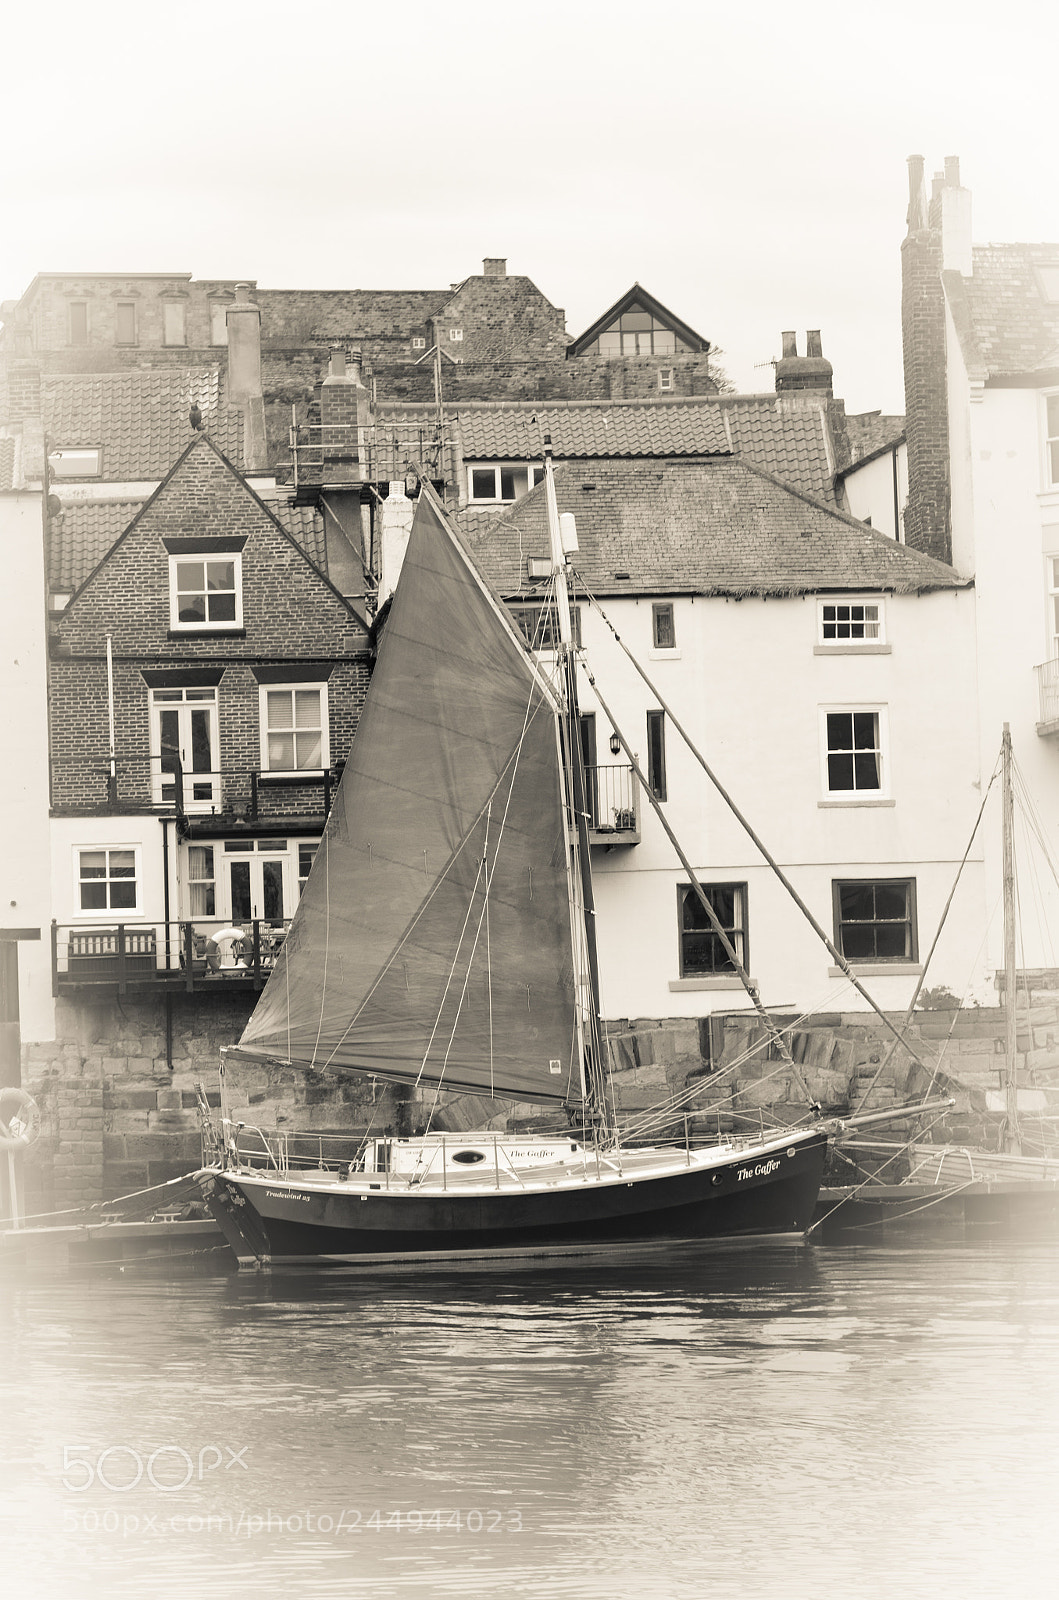 Pentax K-30 sample photo. Boat in the whitby photography